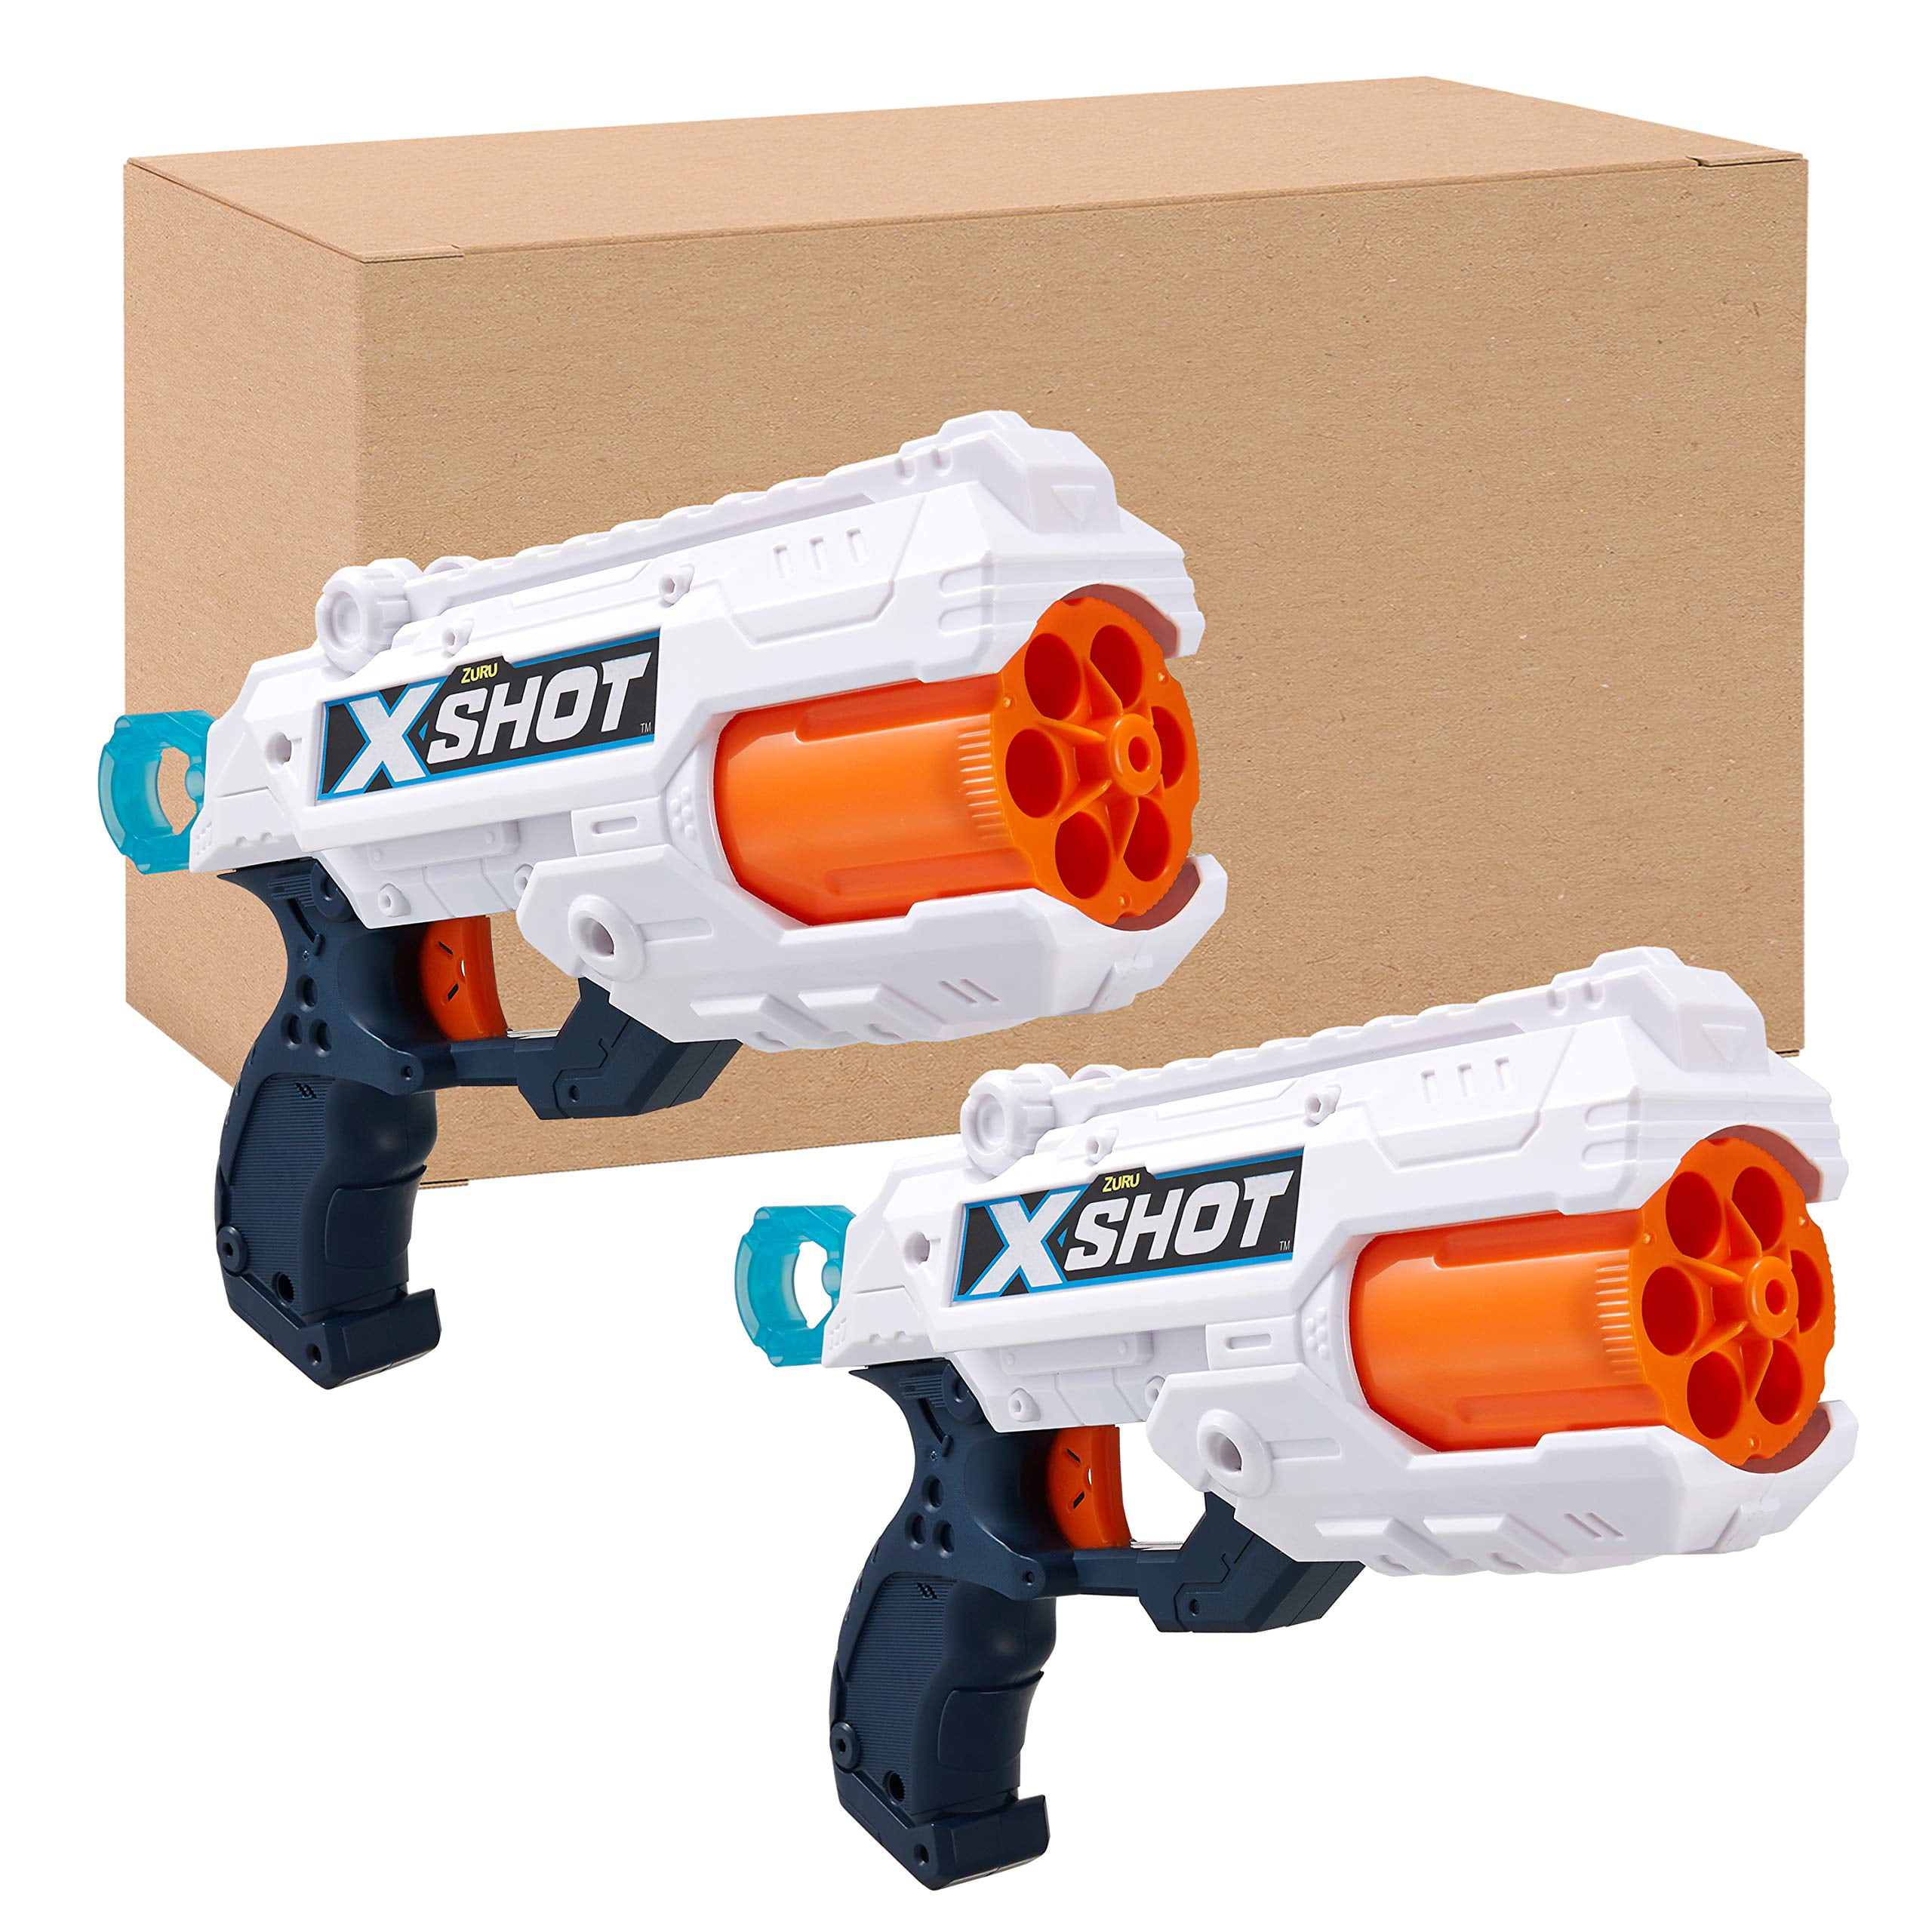 XShot X-Shot Excel Royale Edition Reflex 6 and Kickback Combo Pack (3 Cans  + 16 Darts) by ZURU, Golden Foam Dart Blaster, Easy Reload, Toy, Shooting